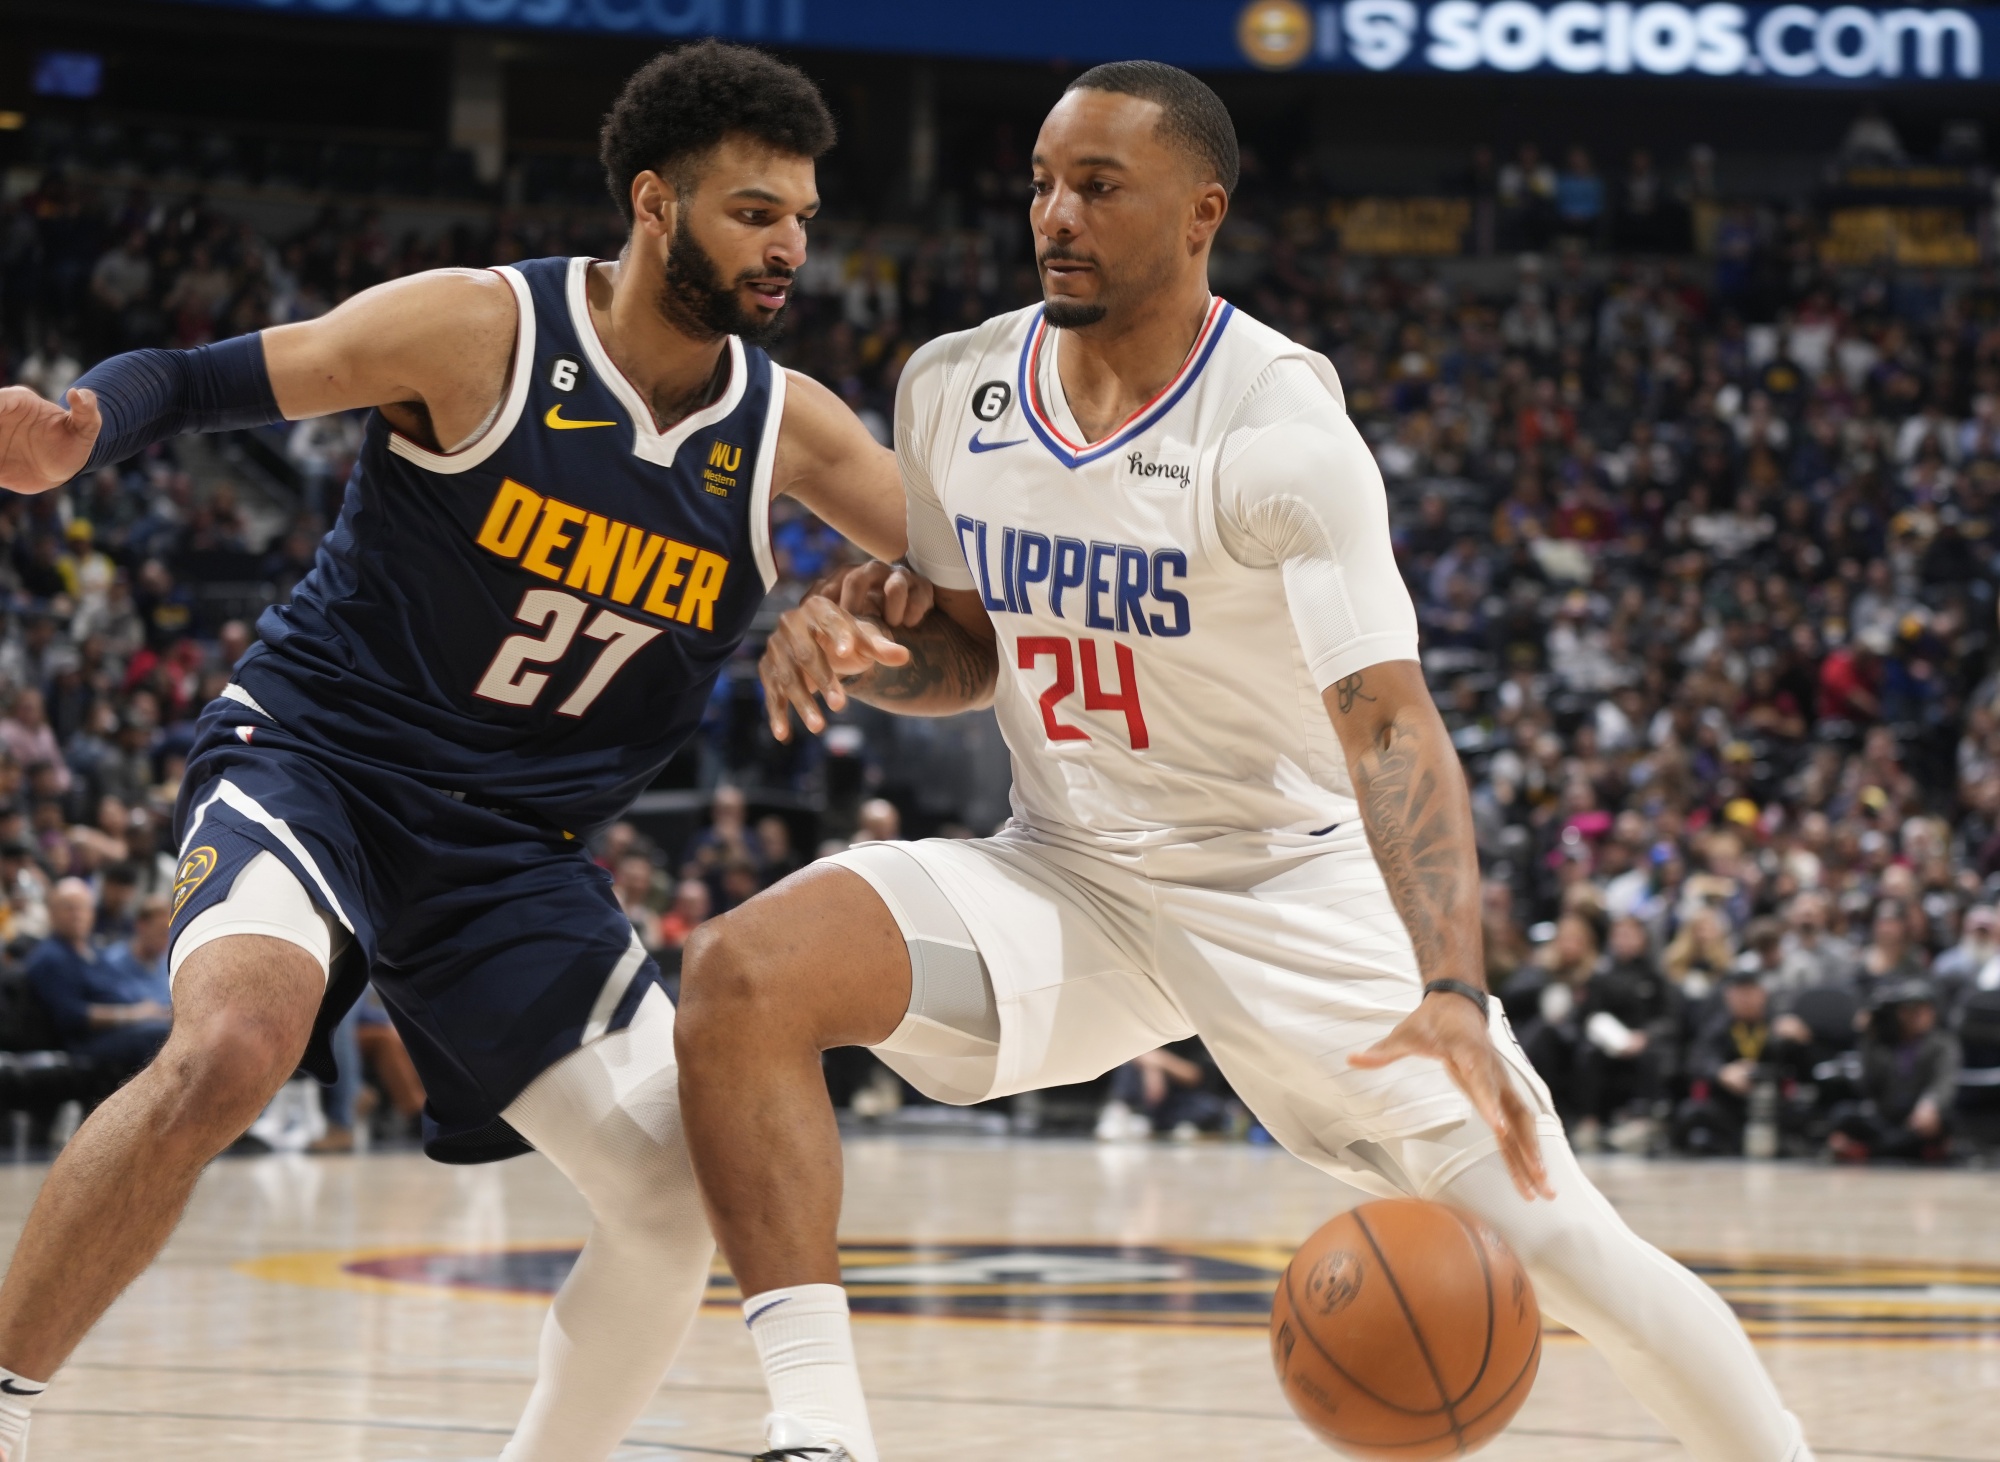 Murray's Early Exploits Lead Nuggets to Rout of Clippers - Bloomberg